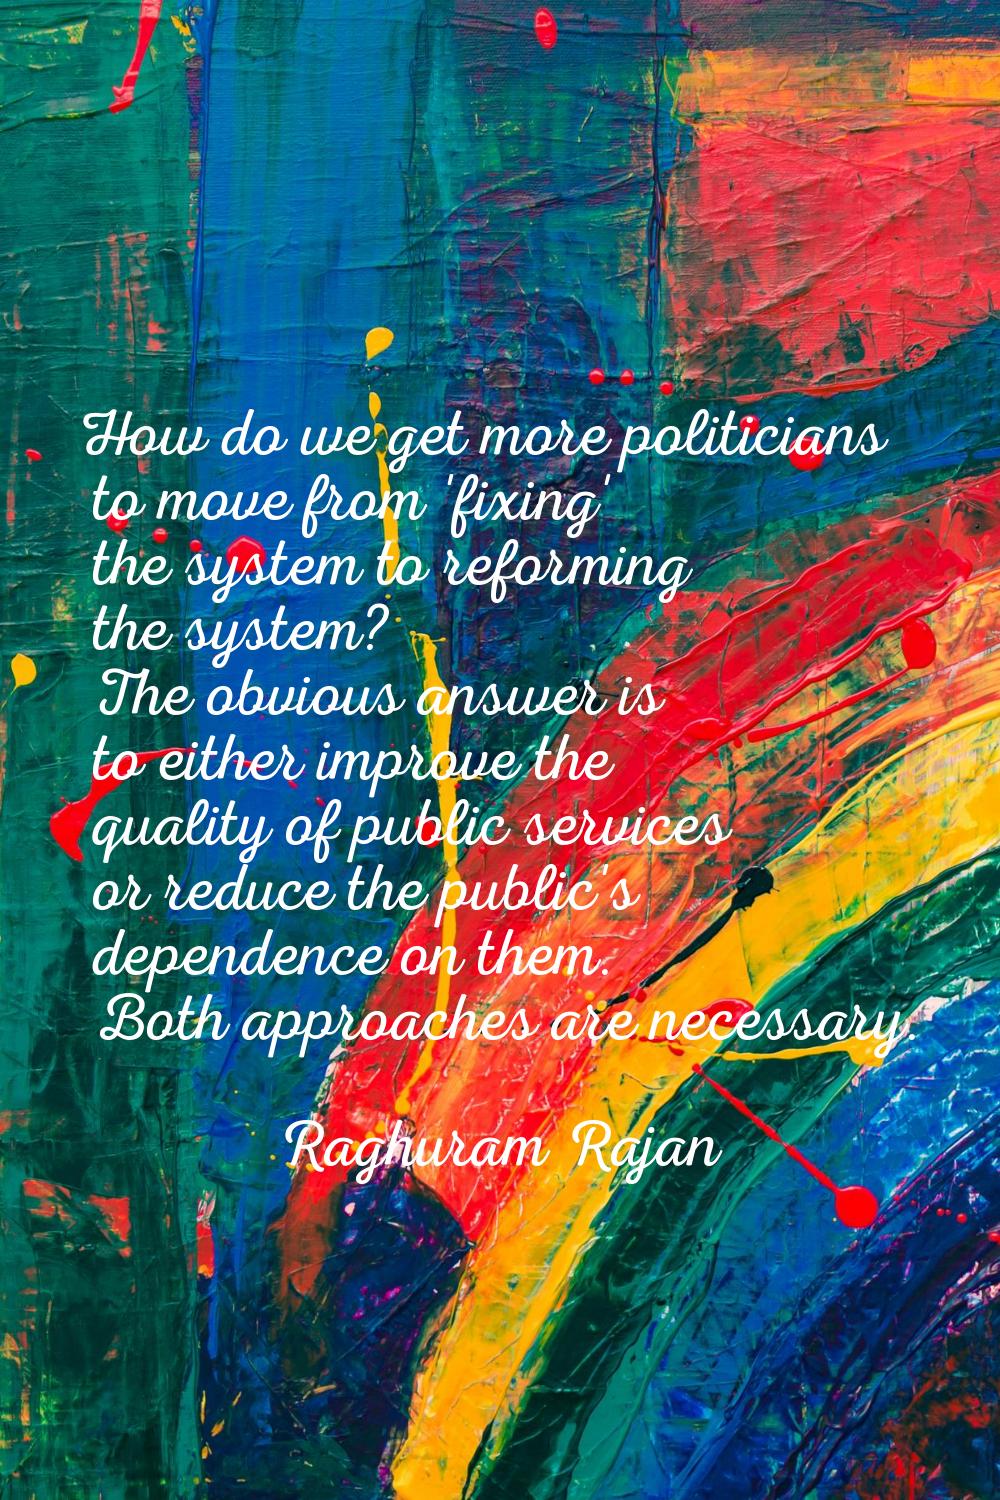 How do we get more politicians to move from 'fixing' the system to reforming the system? The obviou